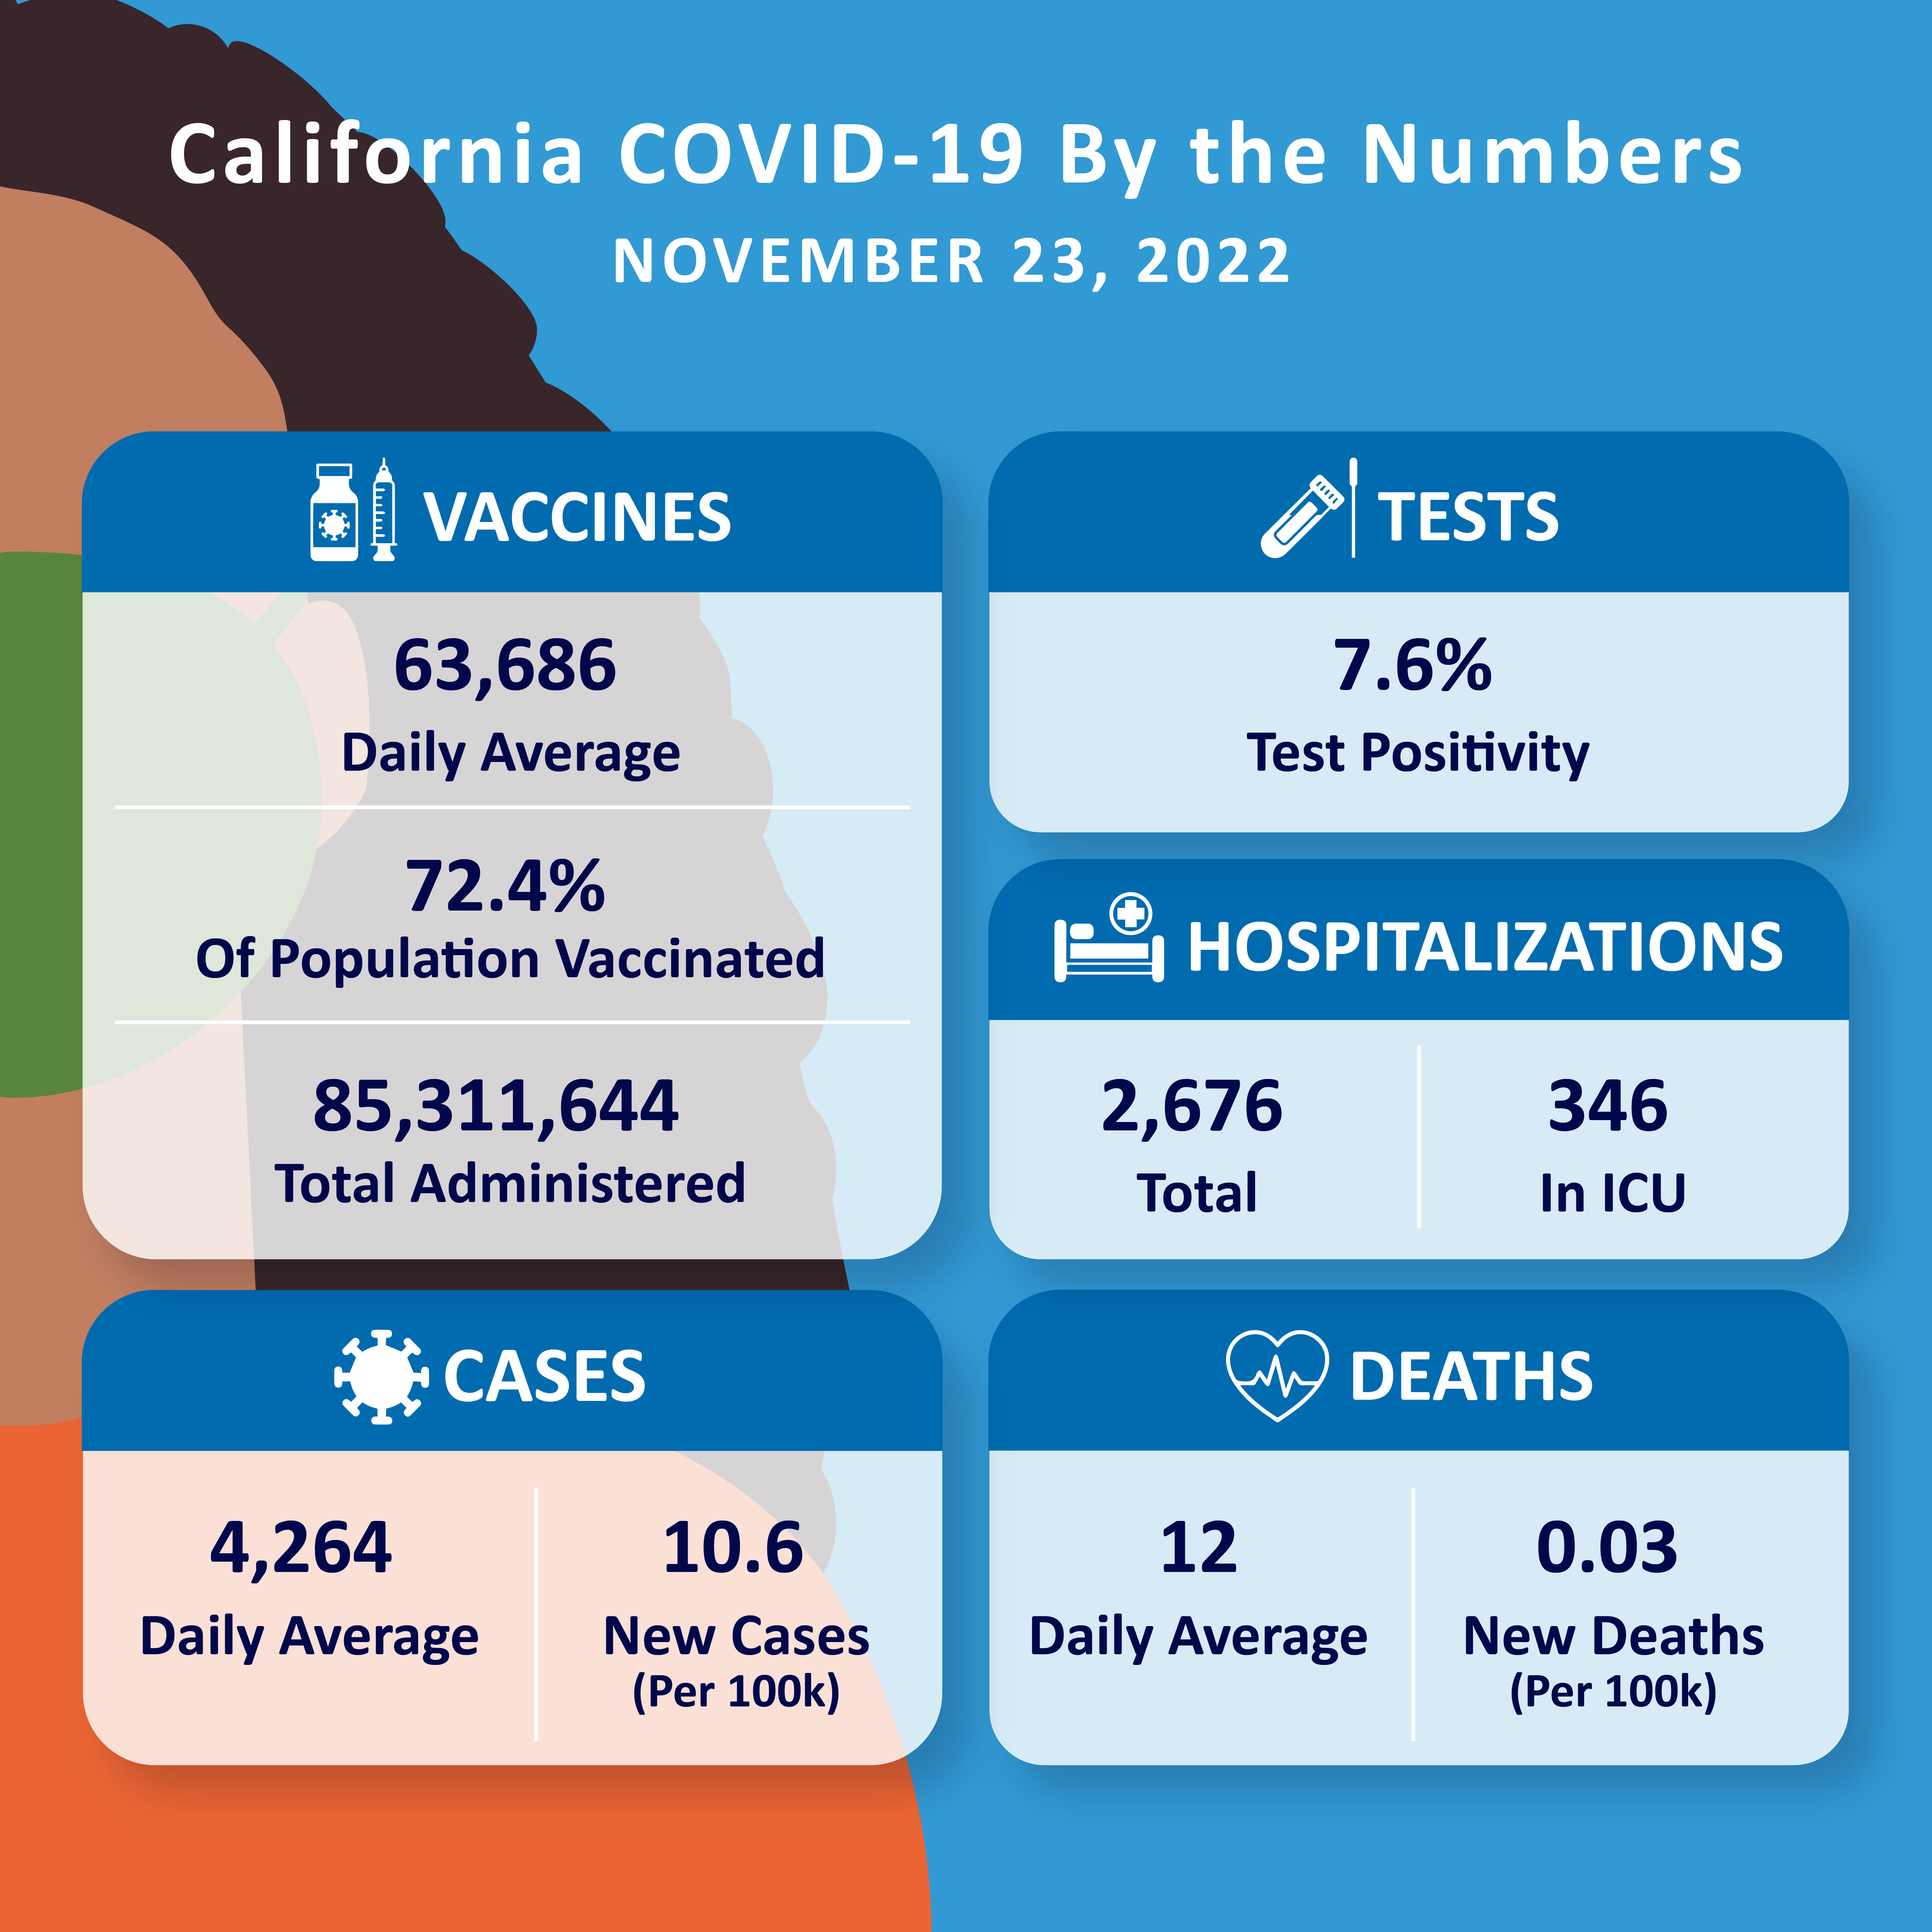 CA COVID-19 by the Numbers November 23, 2022